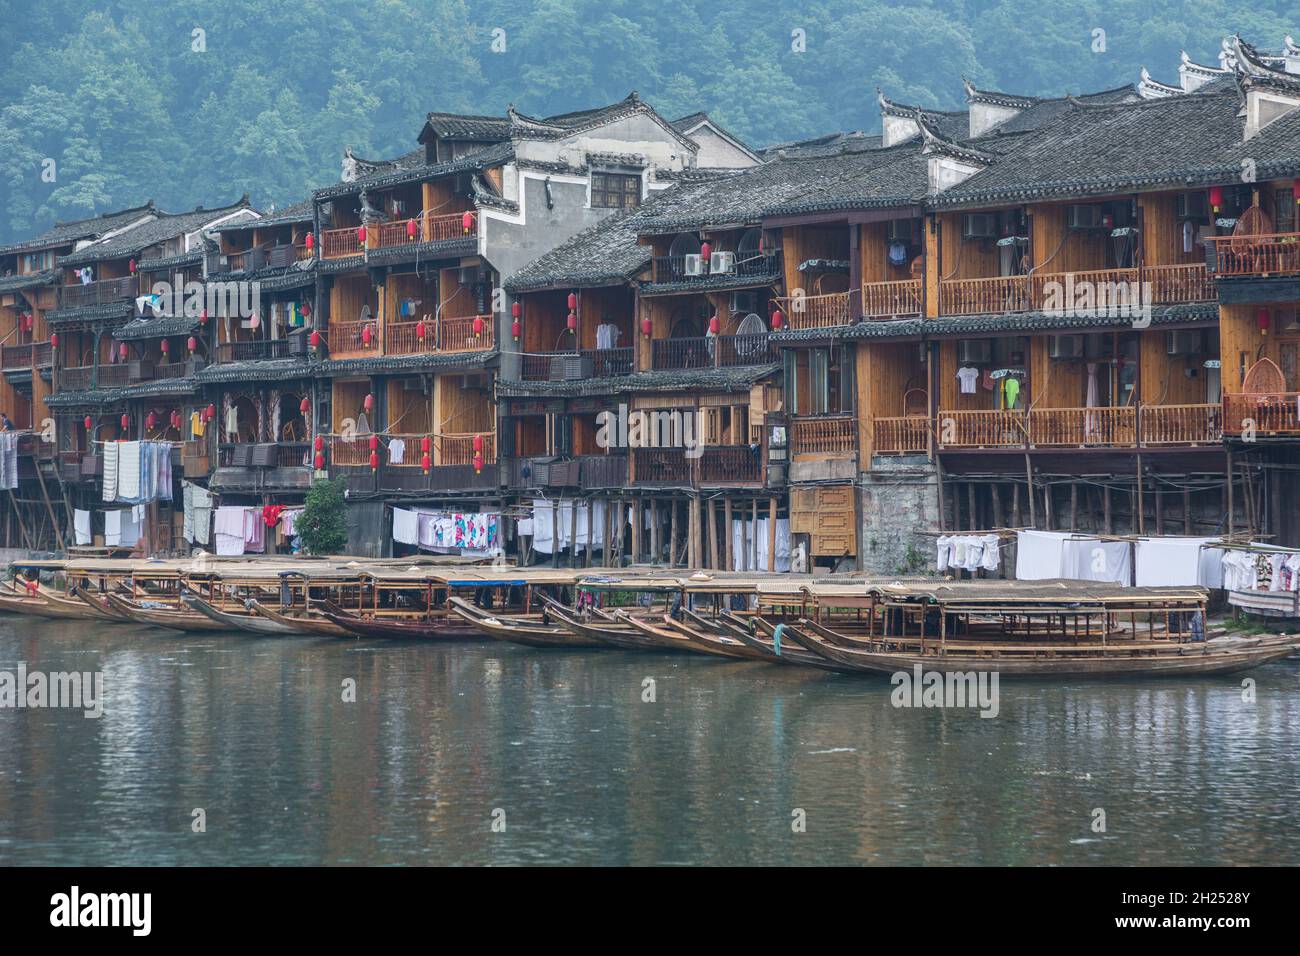 Covered tour boats docked in front Diaojiao-style buildings along the Tuojiang River, Fenghuang, China. Stock Photo